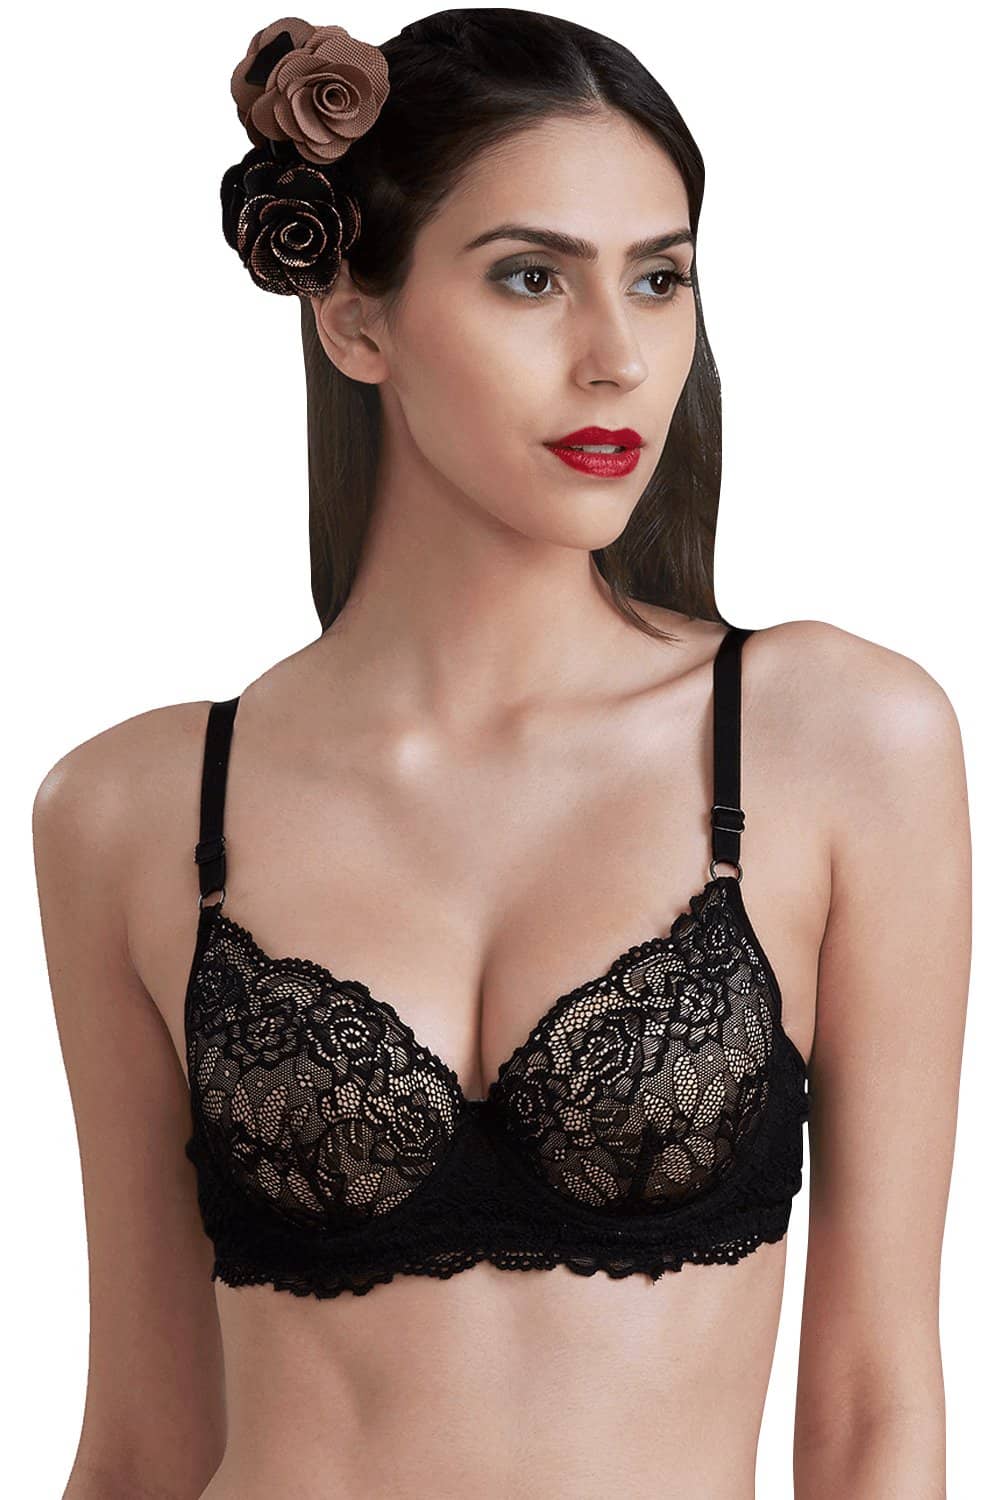 Organic Cotton Padded Underwired Lace Bra-ISB047